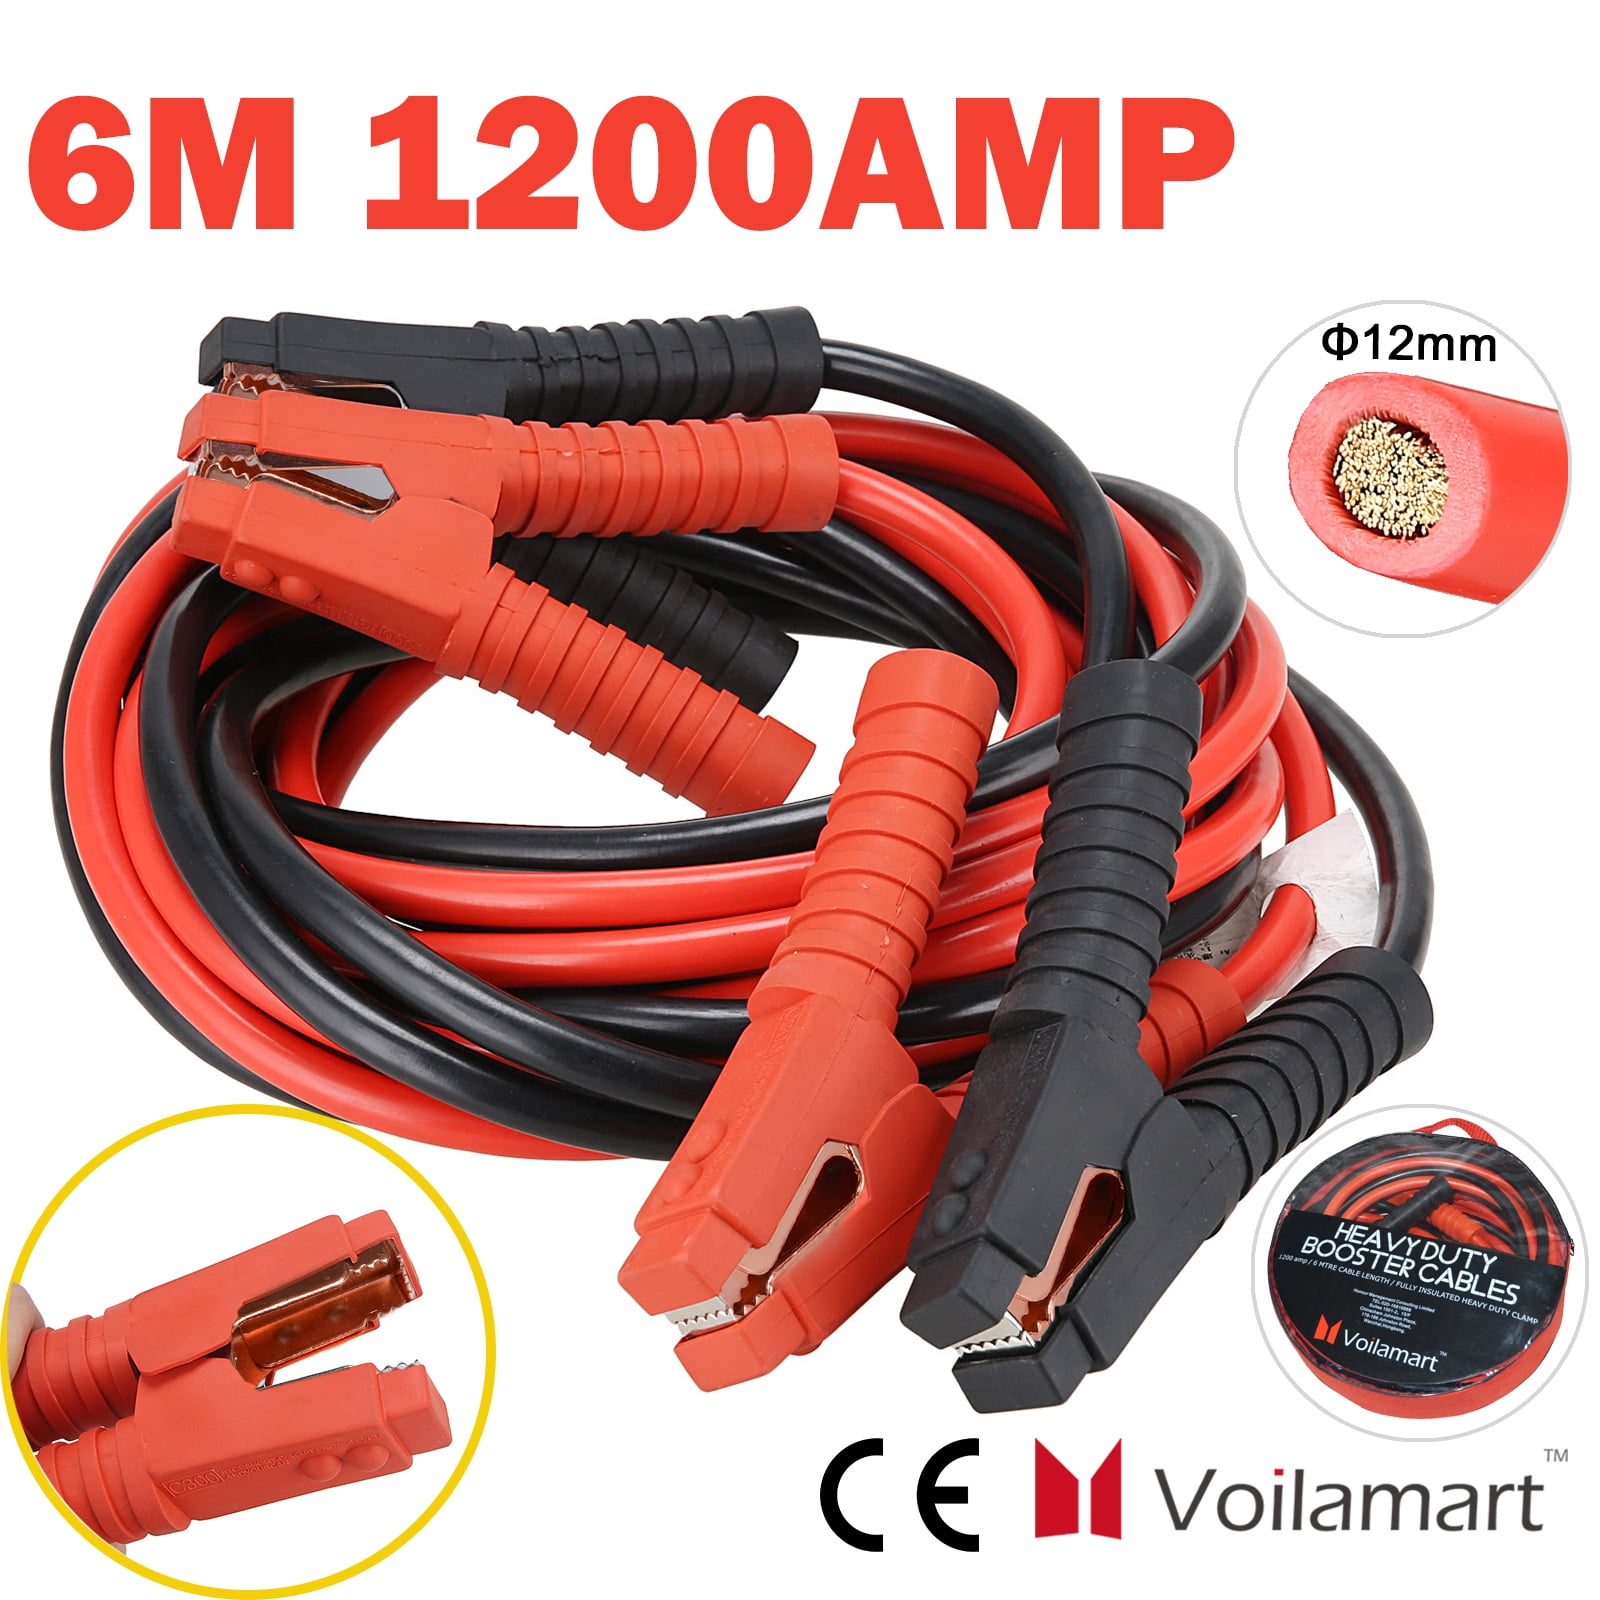 1200AMP 1 Gauge Booster Cables 20FT Power Start Jumper Heavy Duty Car Emergency 